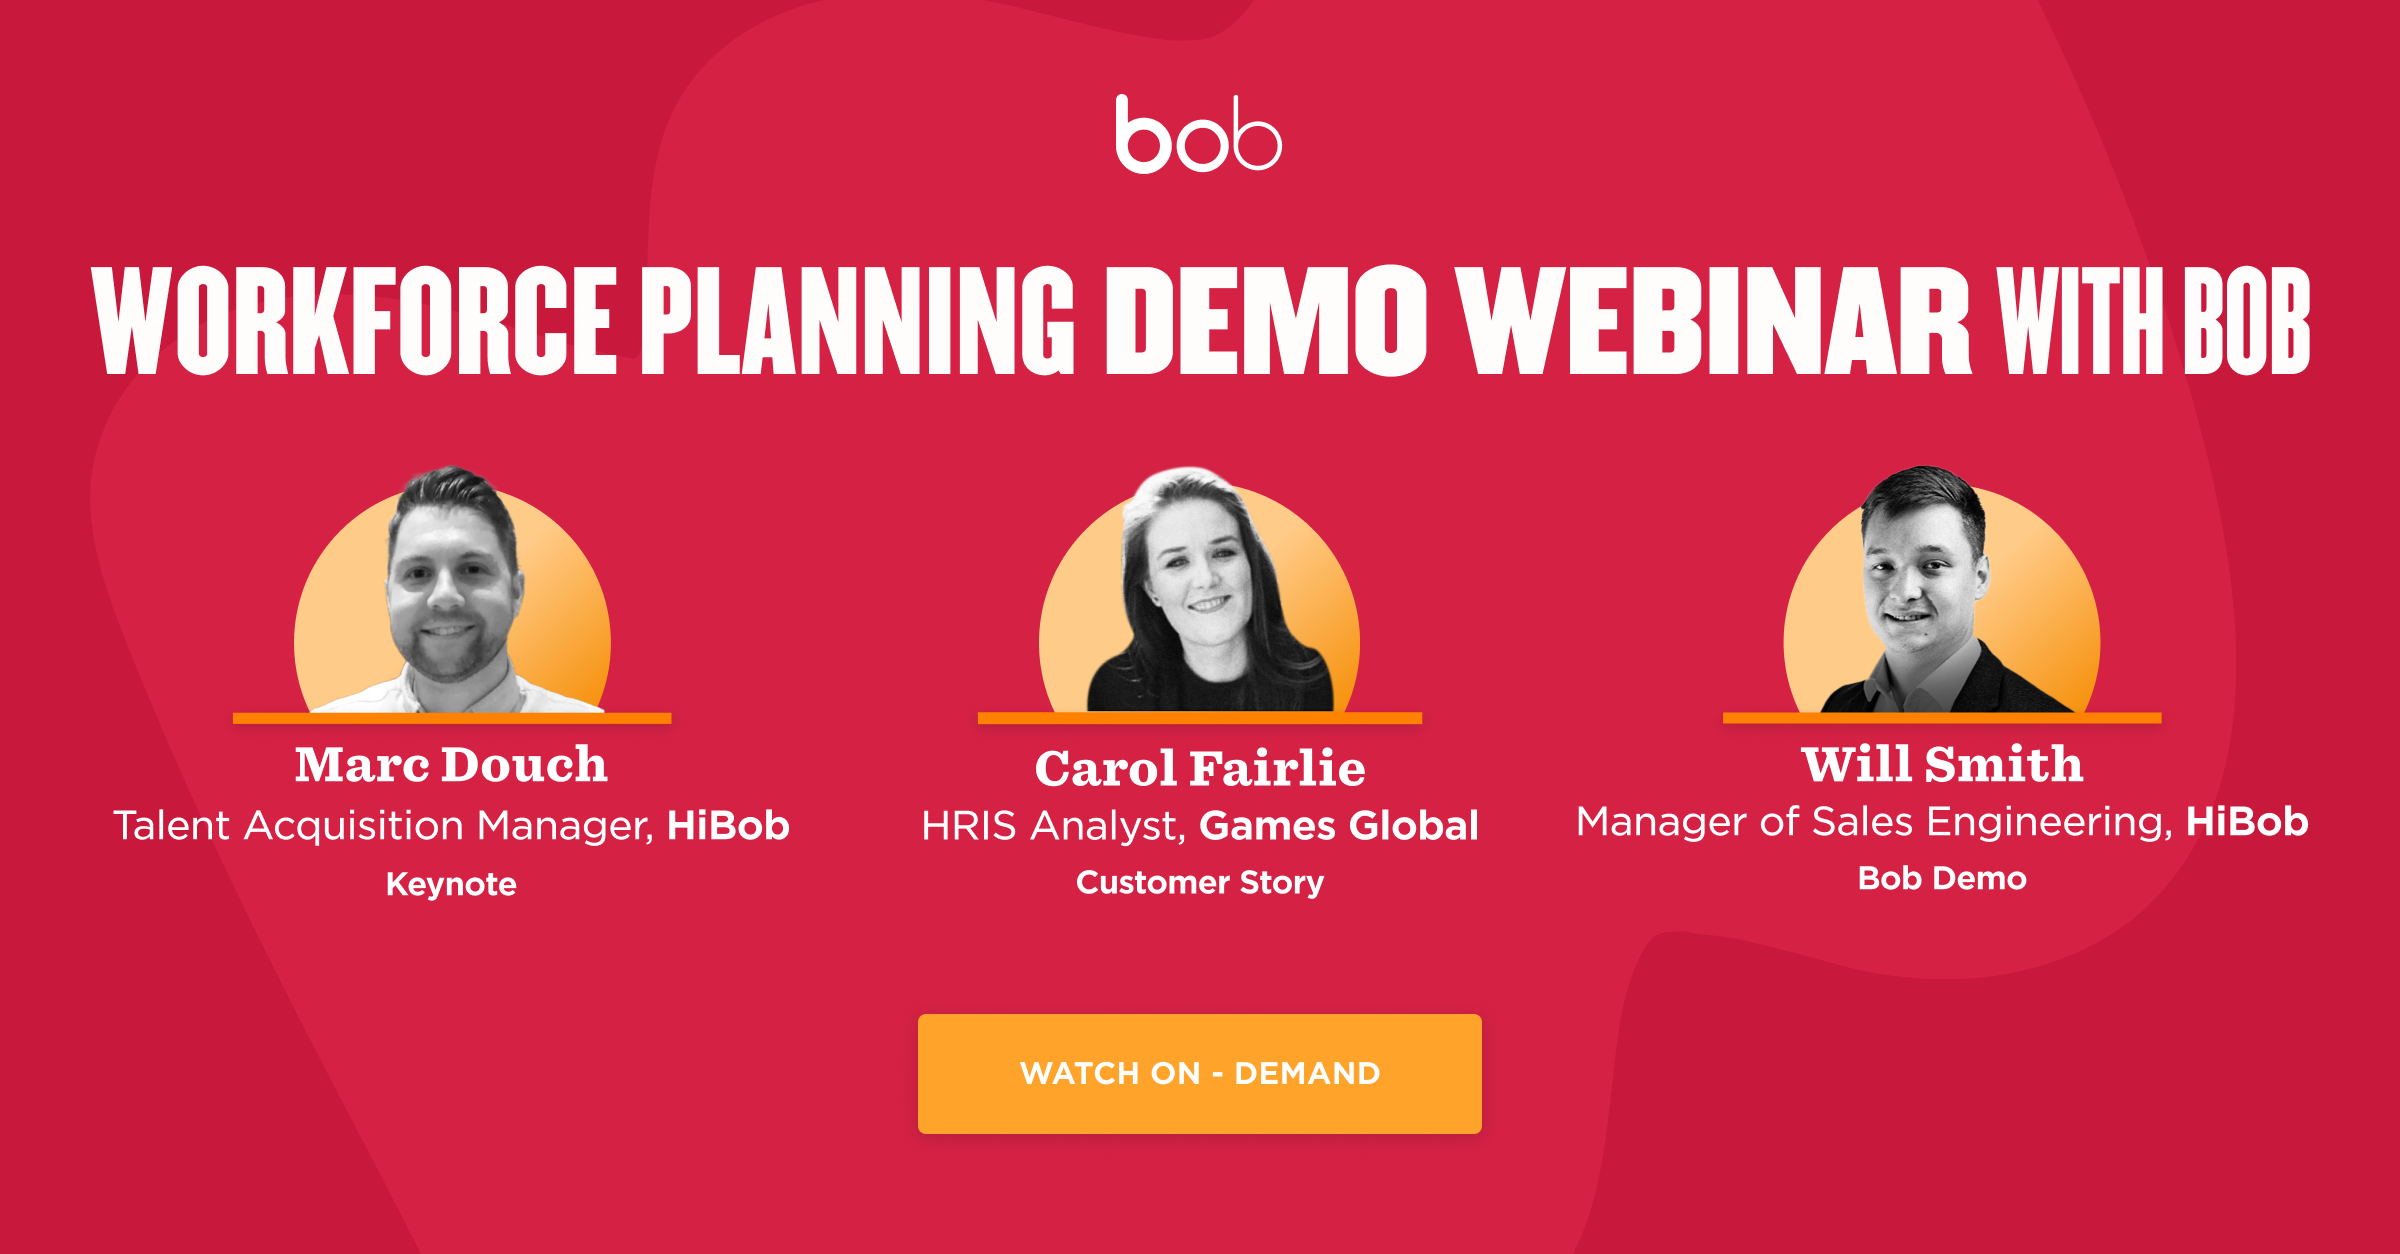 Watch on-demand: Workforce planning demo webinar - Post-event_Workforce-planning-demo-day_Webinar_Sharing-image_1200X627PX.png